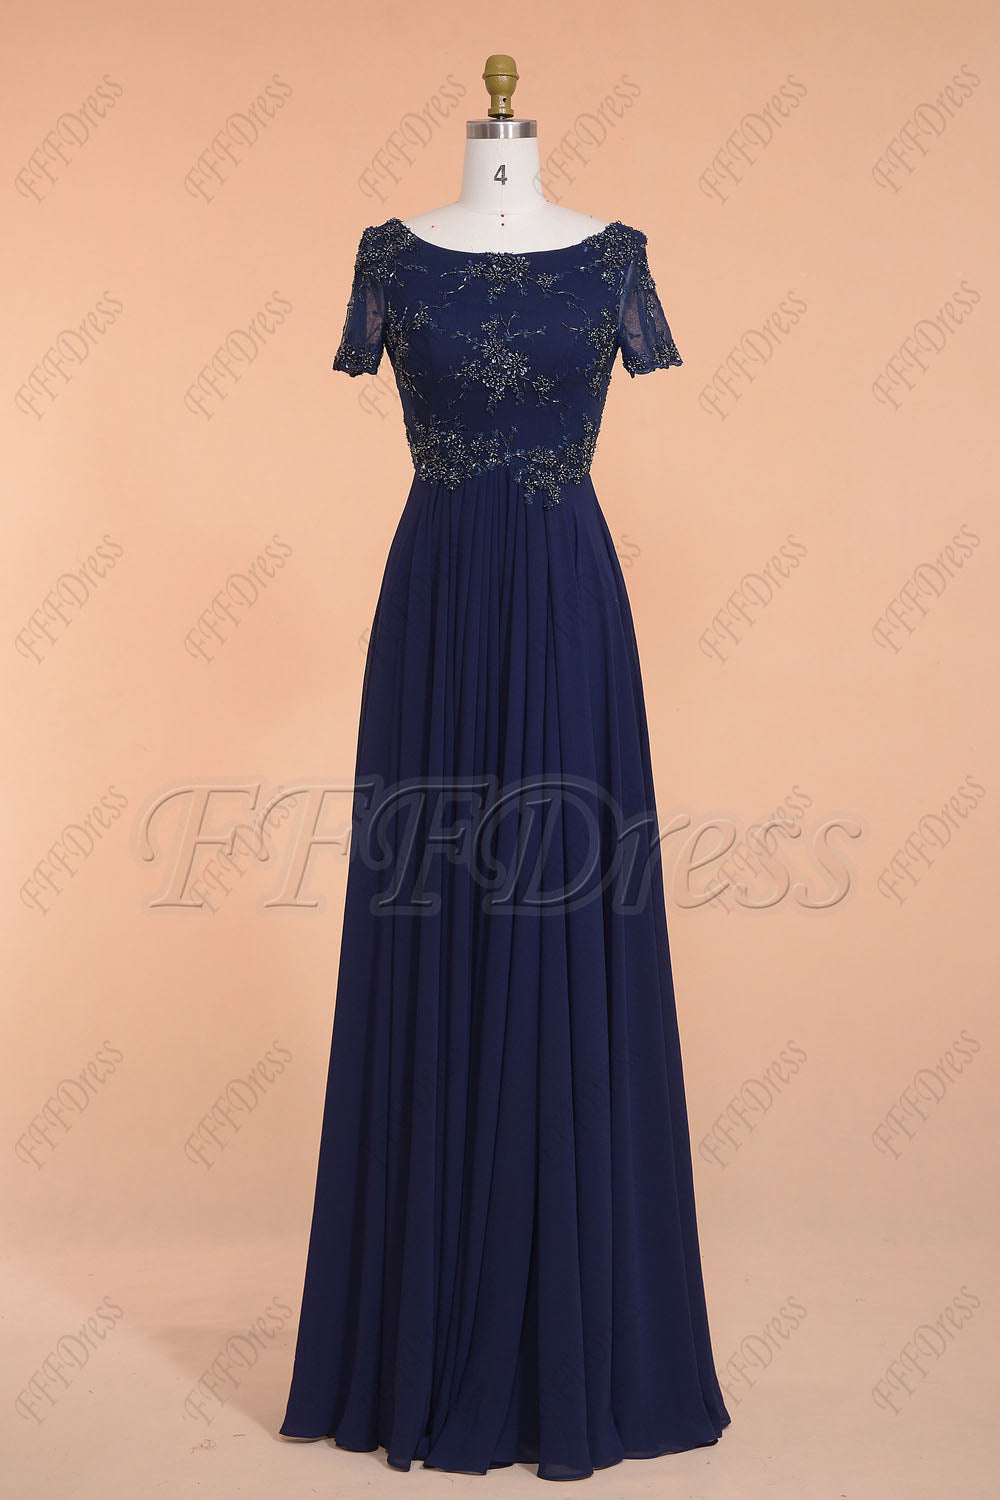 Navy blue modest beaded prom dresses long with sleeves